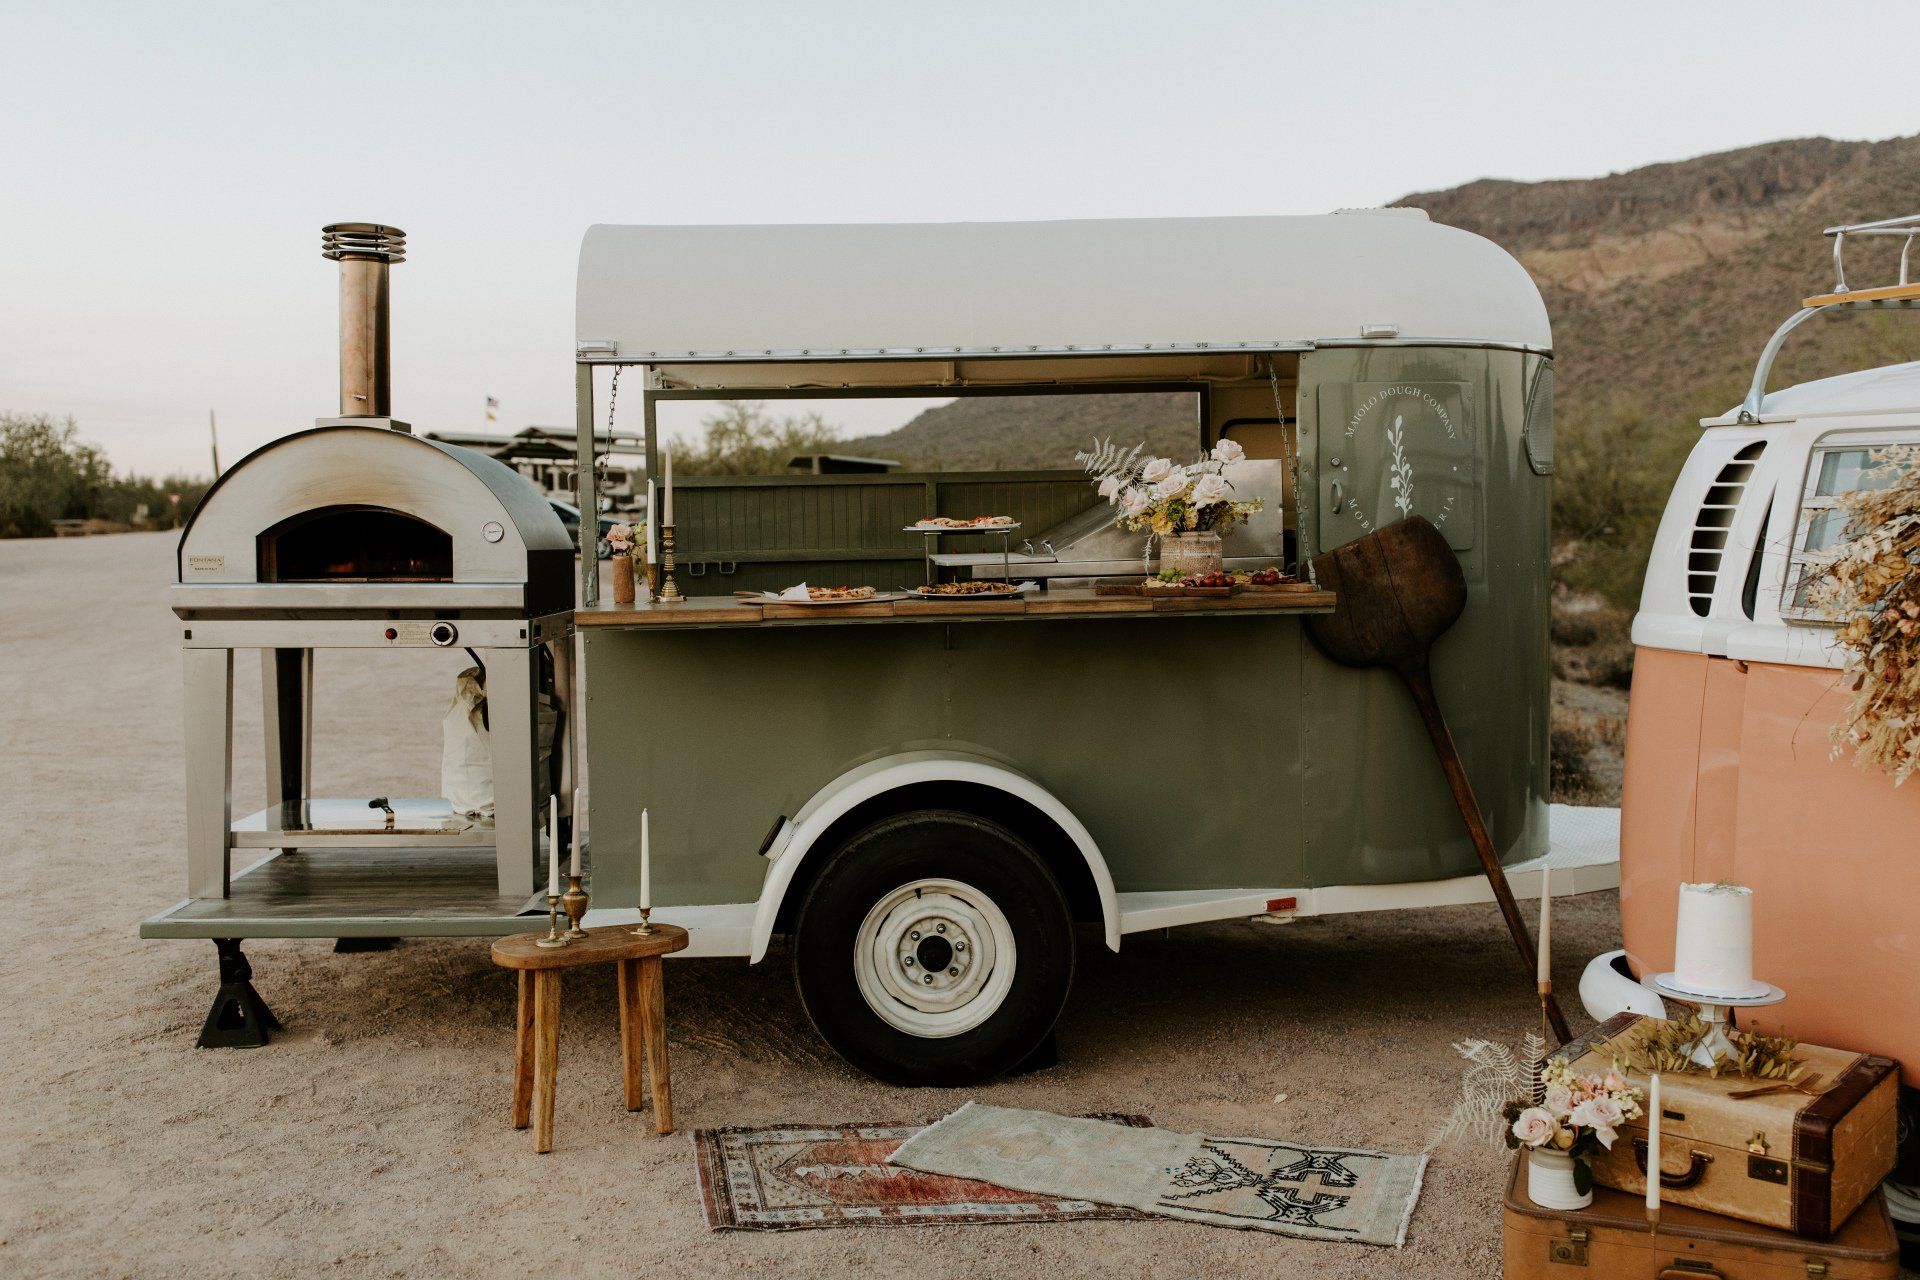 A food truck with a pizza oven on the back, Beyond Basil Mobile Pizzeria.